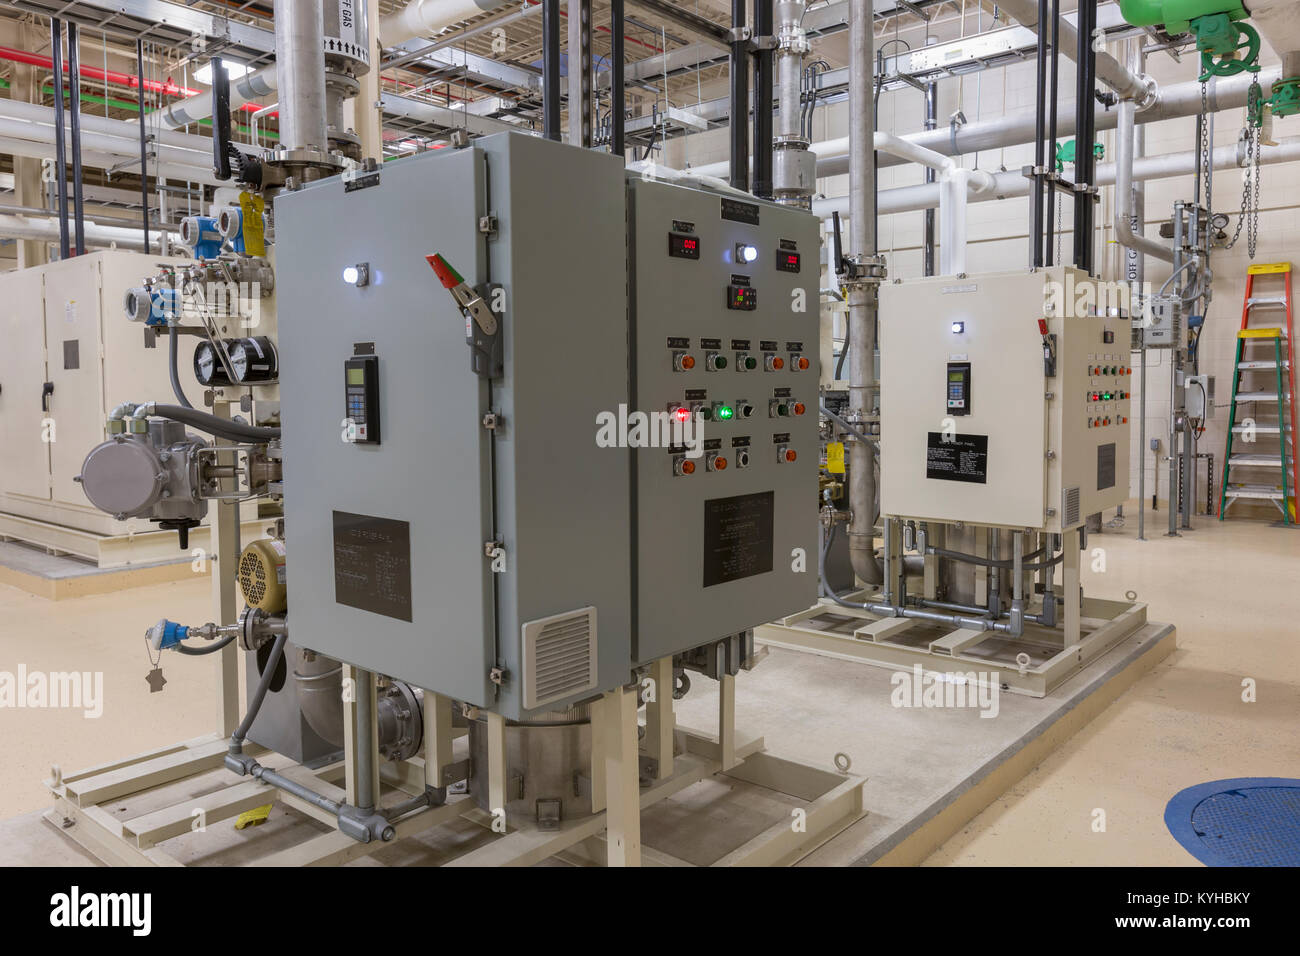 Water treatment plant chemical treatment equipment control panels Stock Photo